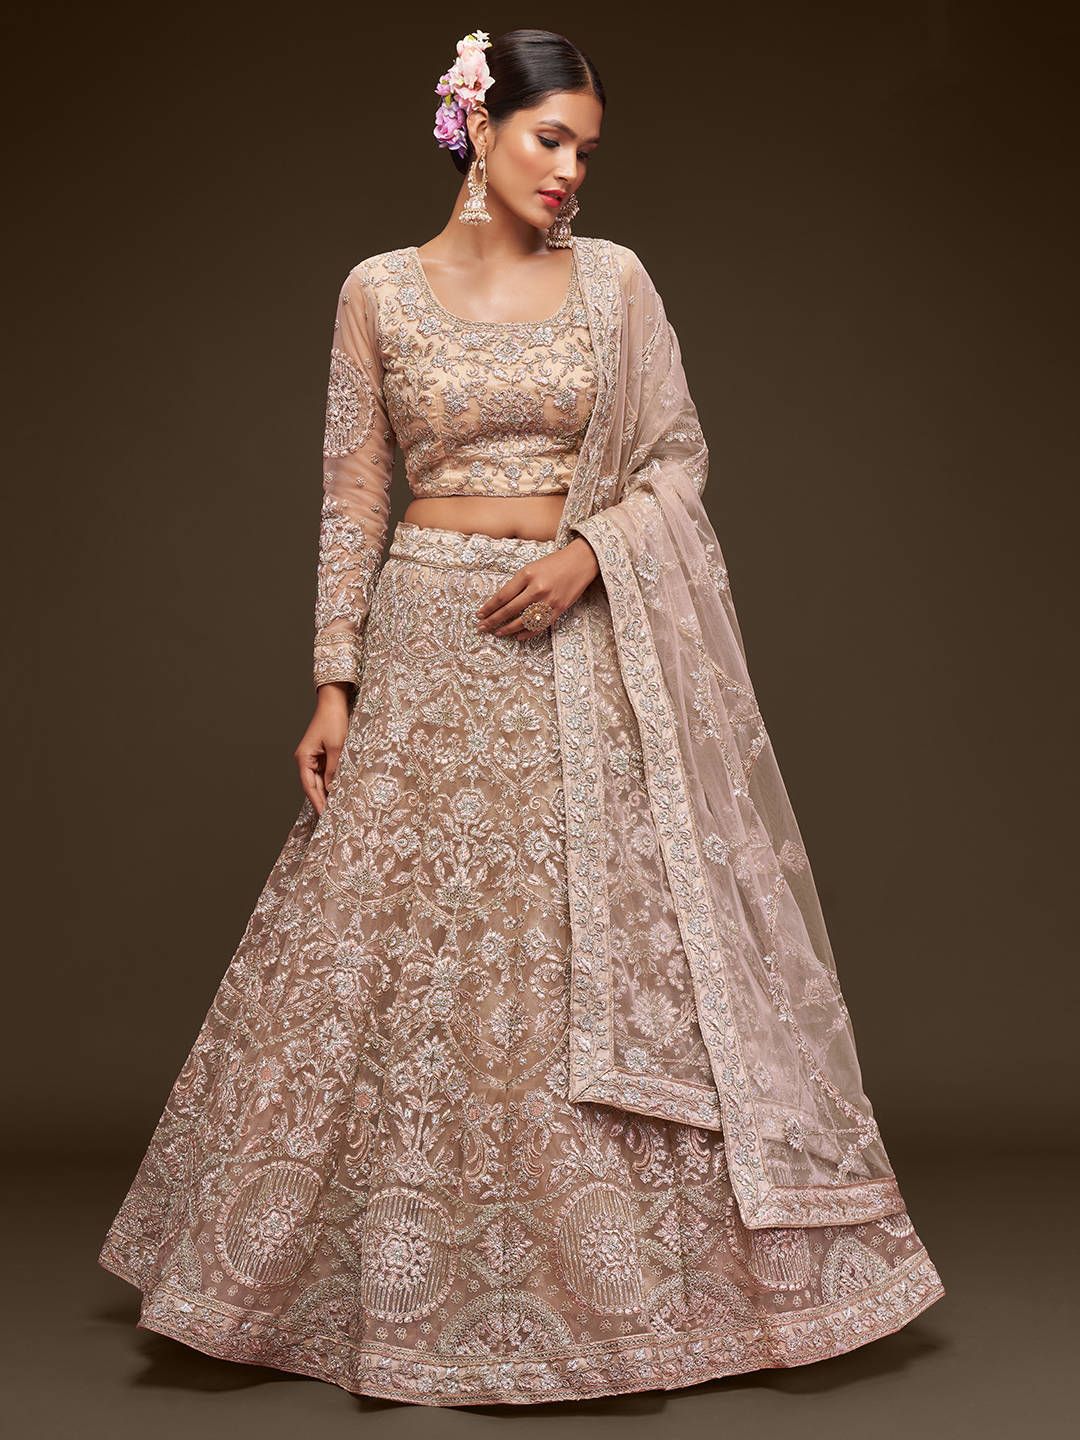 FABPIXEL Women Beige & Silver-Toned Embroidered Semi-Stitched Lehenga Set Price in India